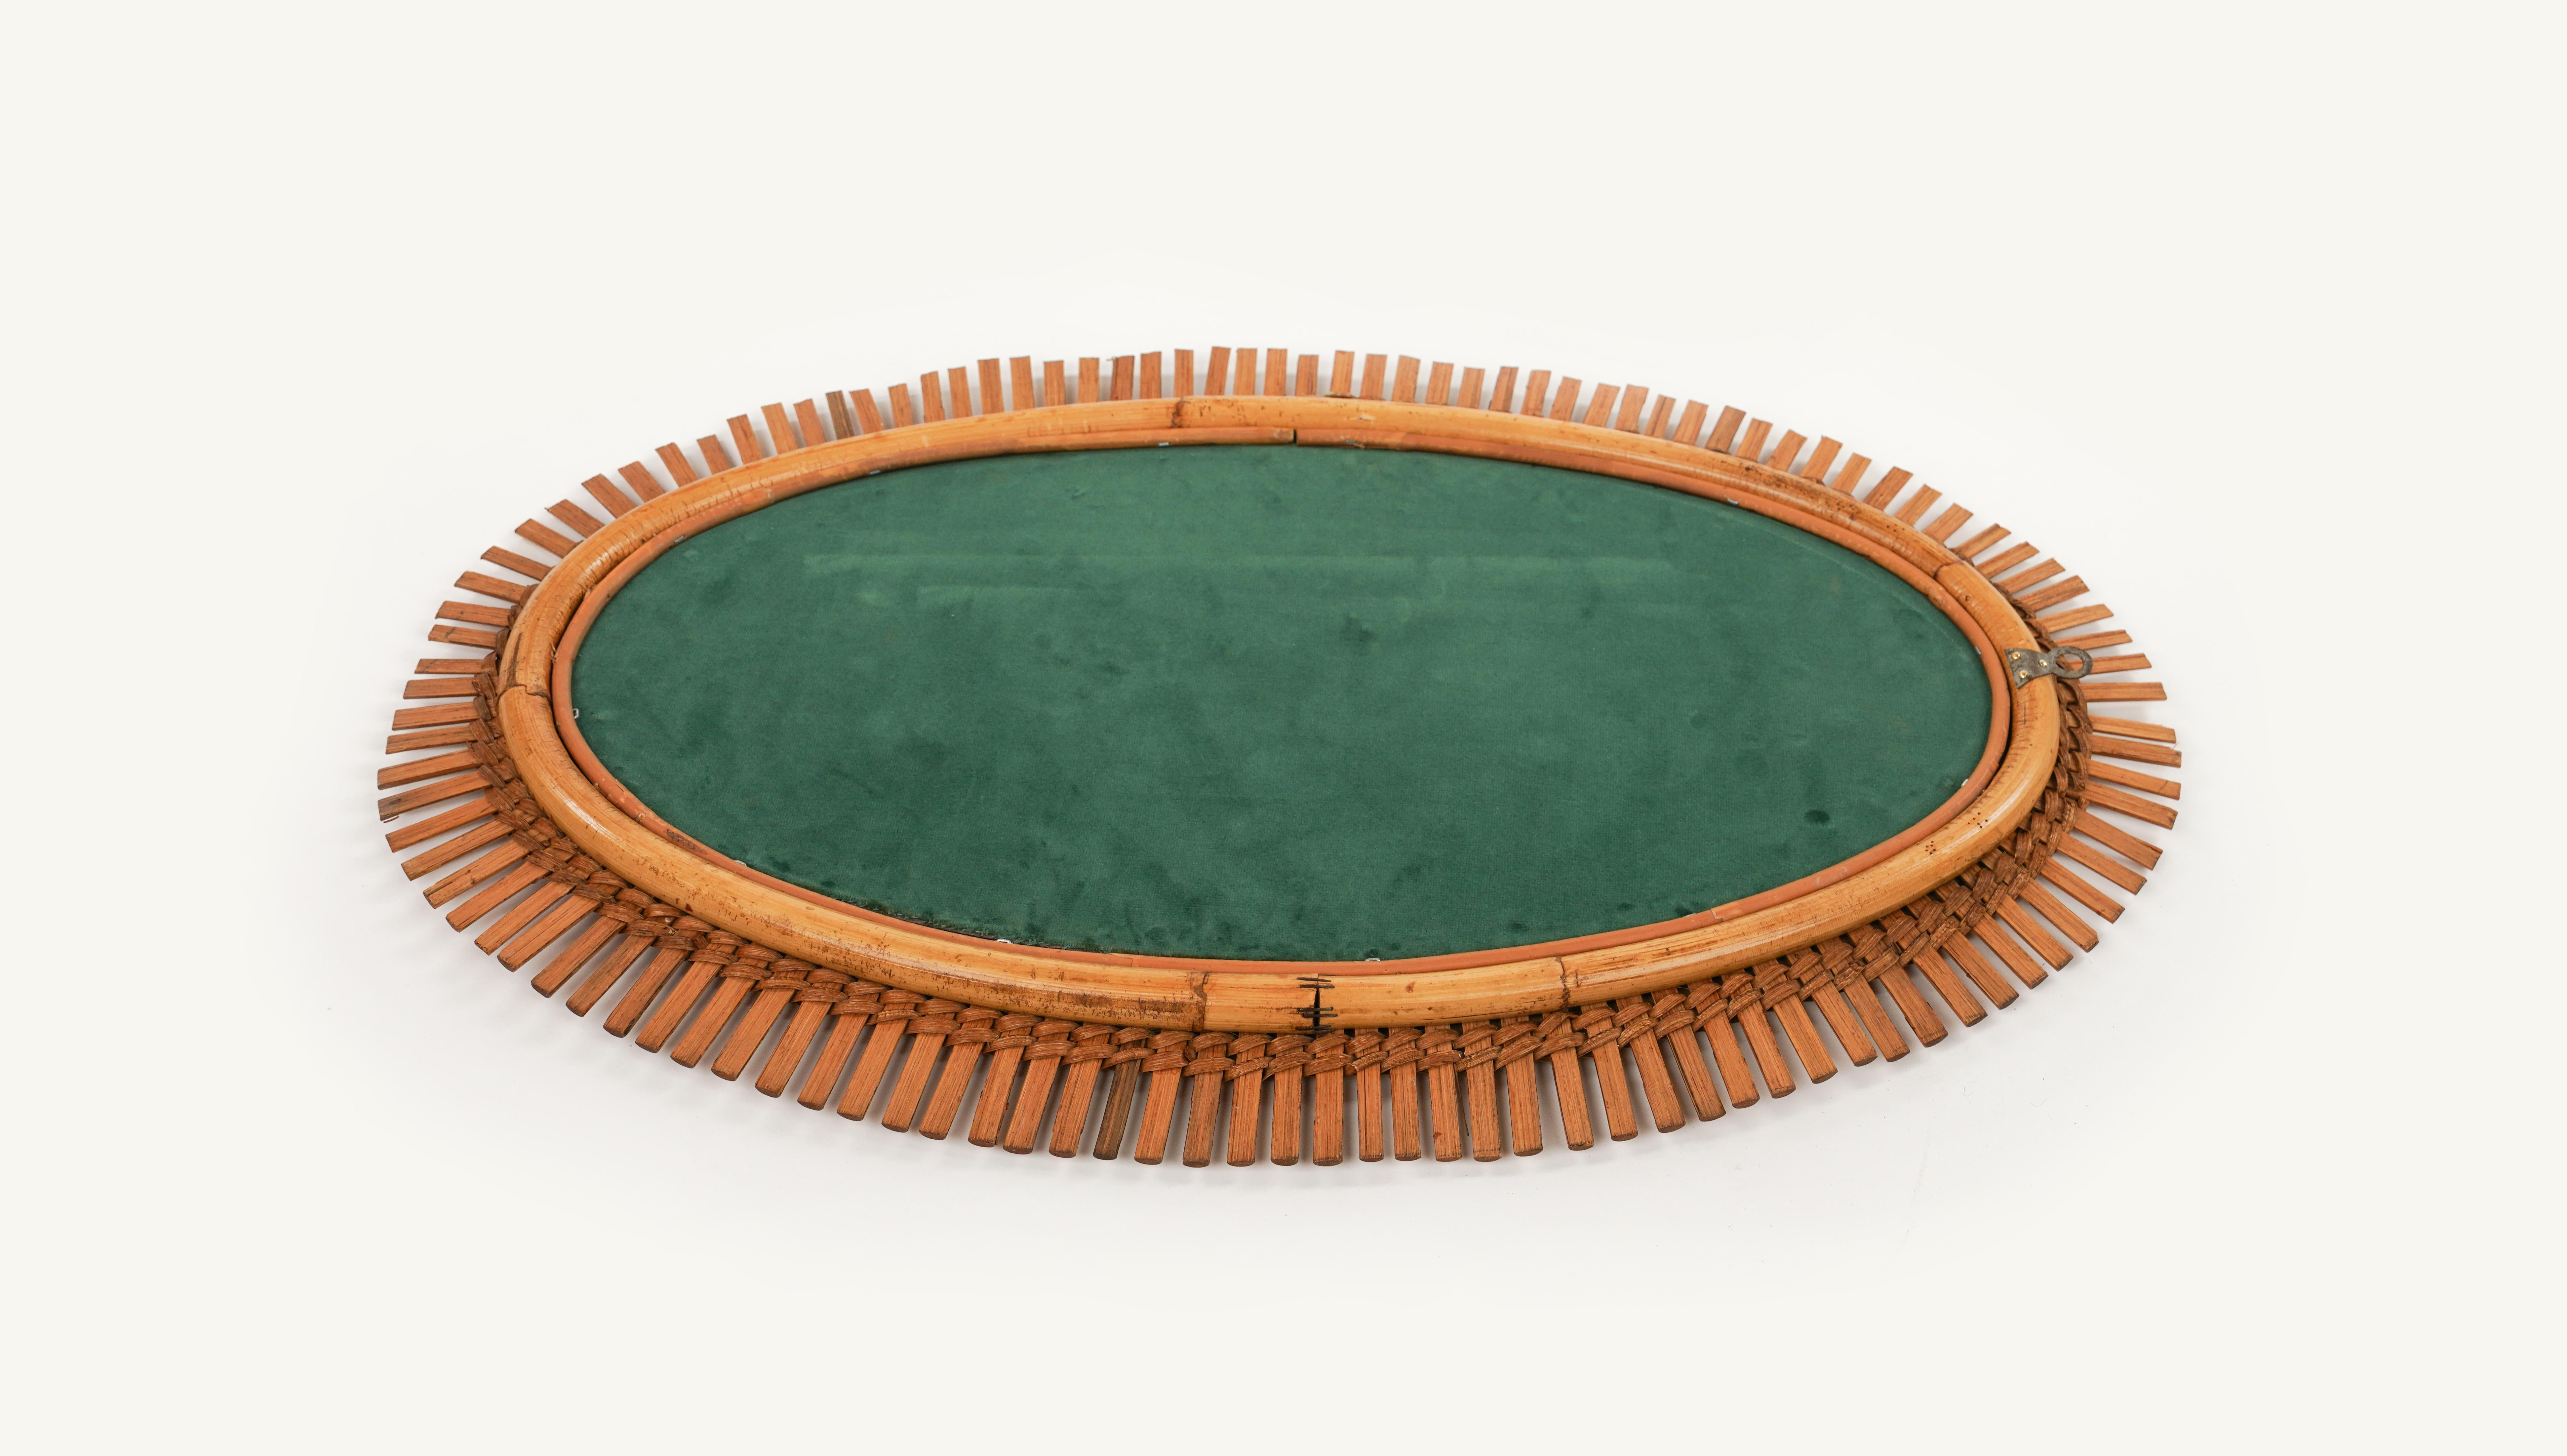 Midcentury Rattan and Bamboo Oval Wall Mirror, Italy 1960s For Sale 6